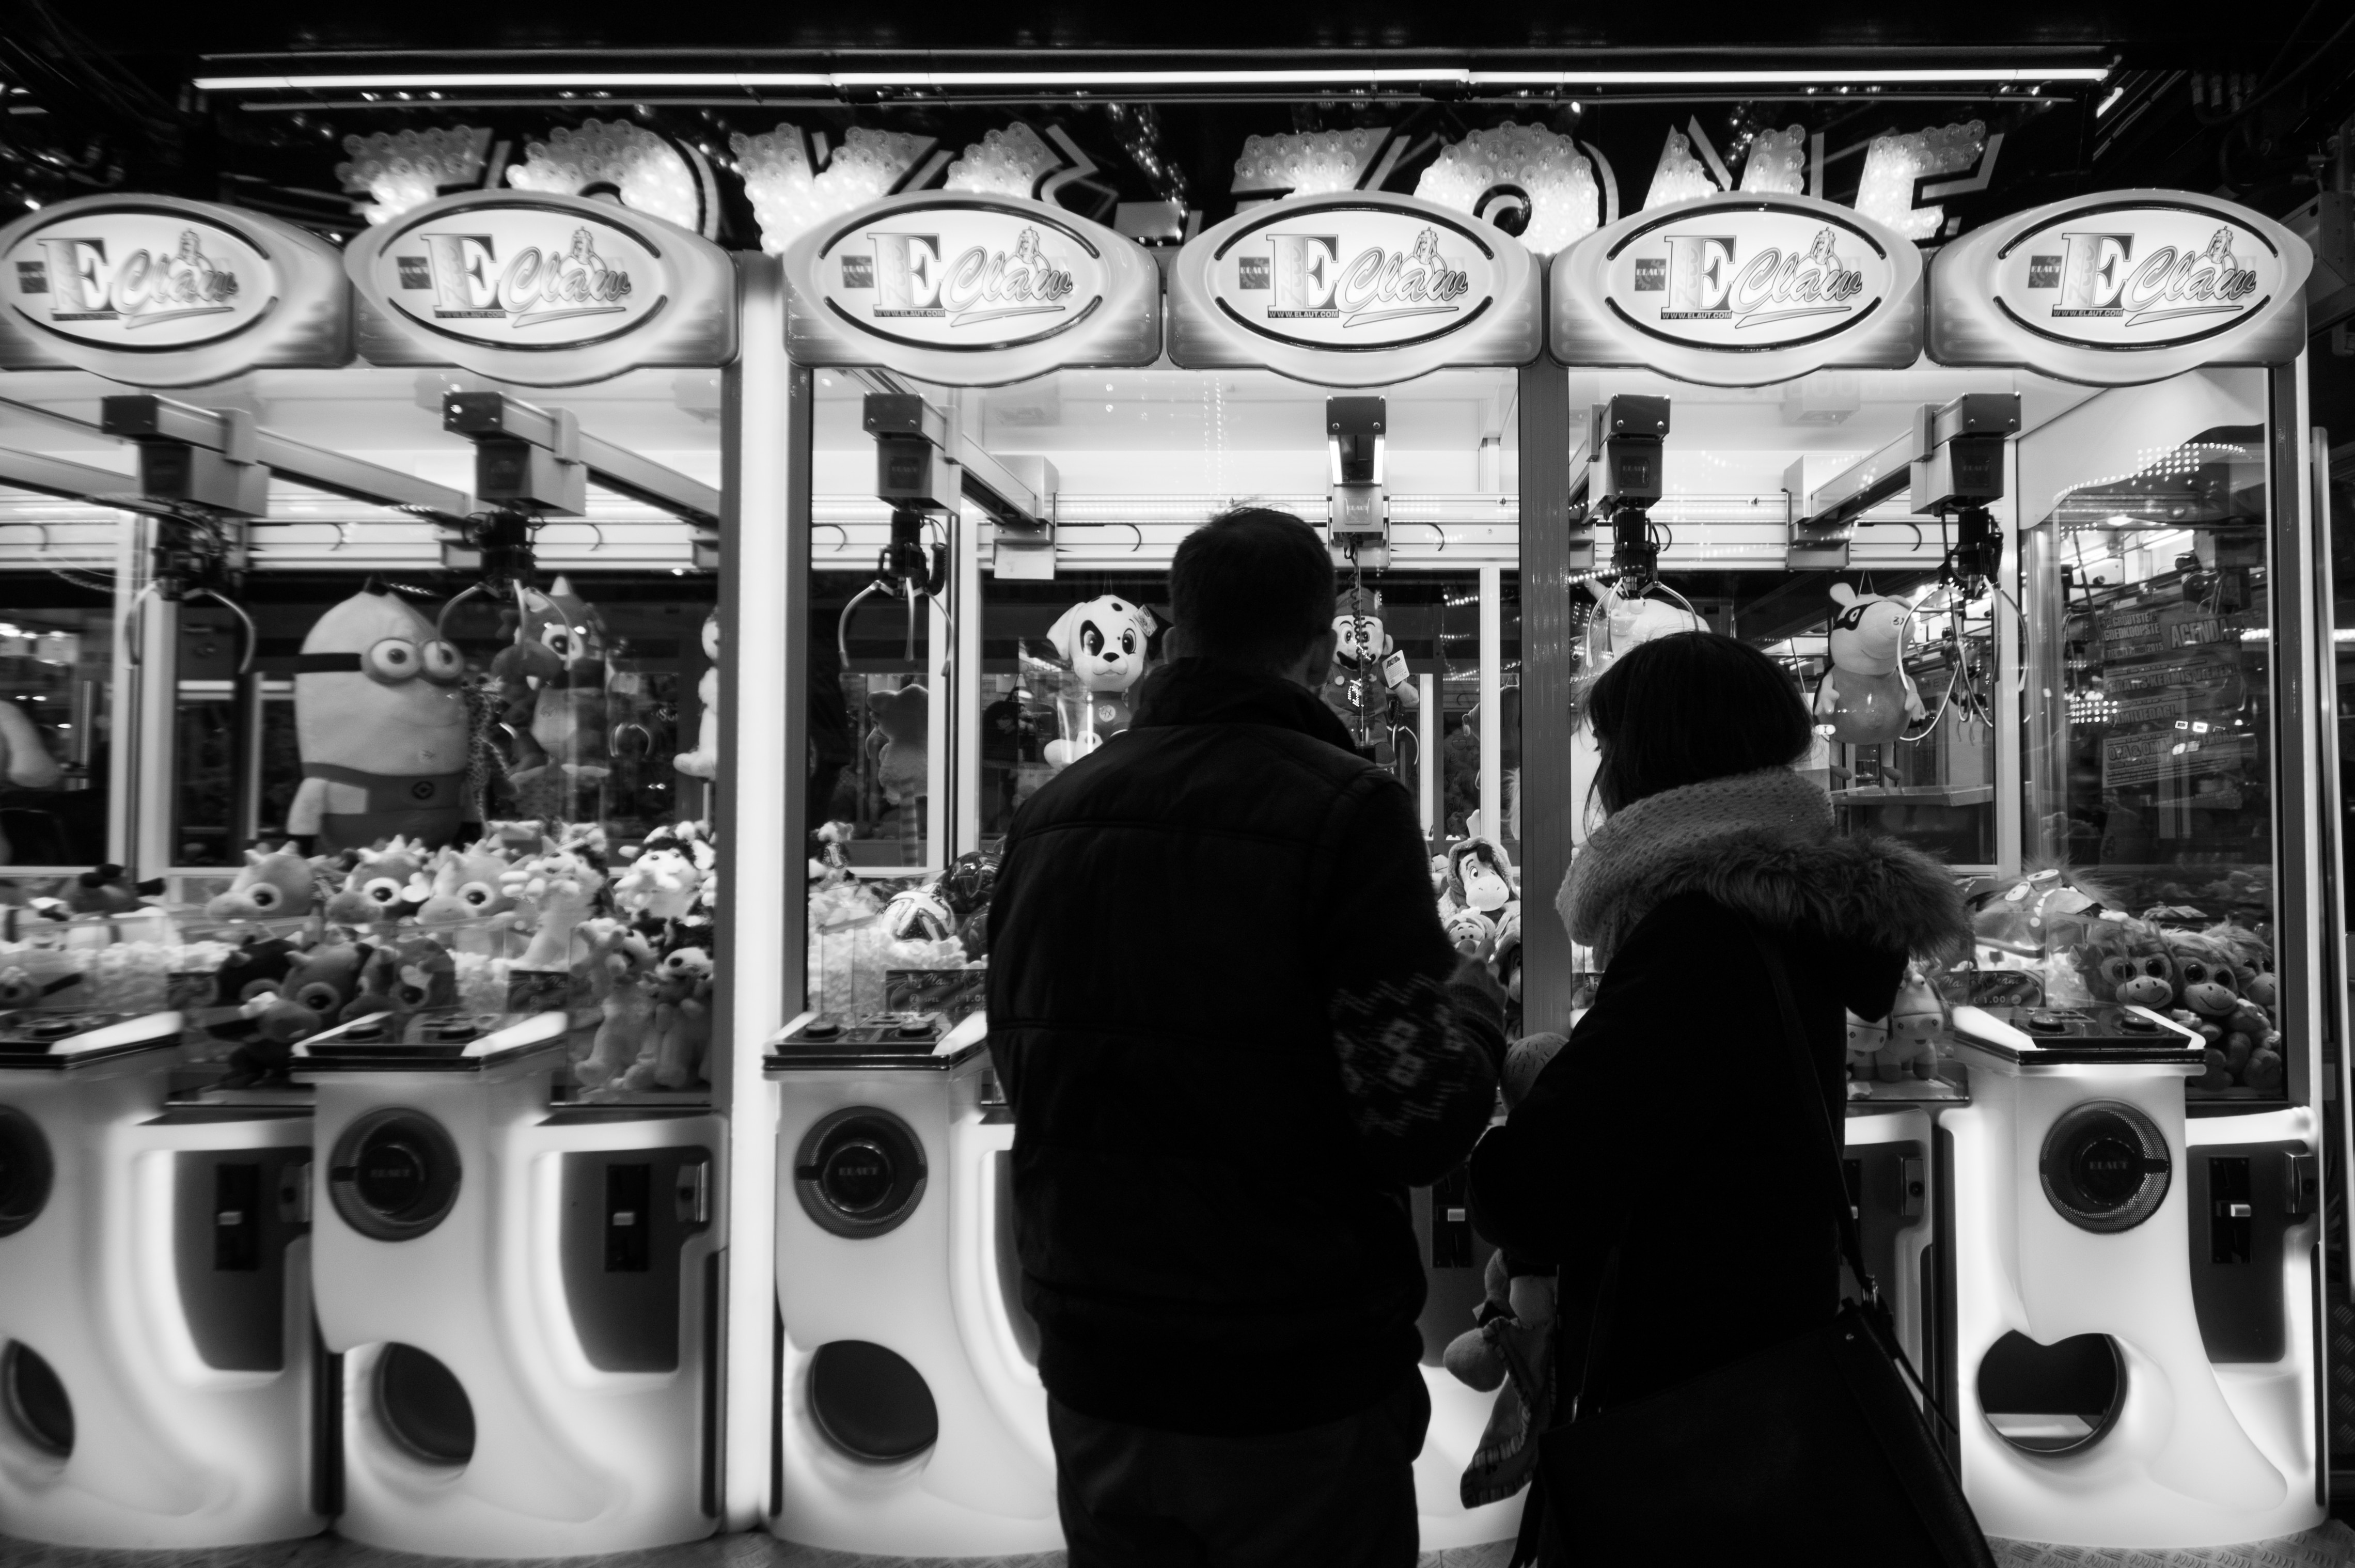 two people in front of claw arcade machine